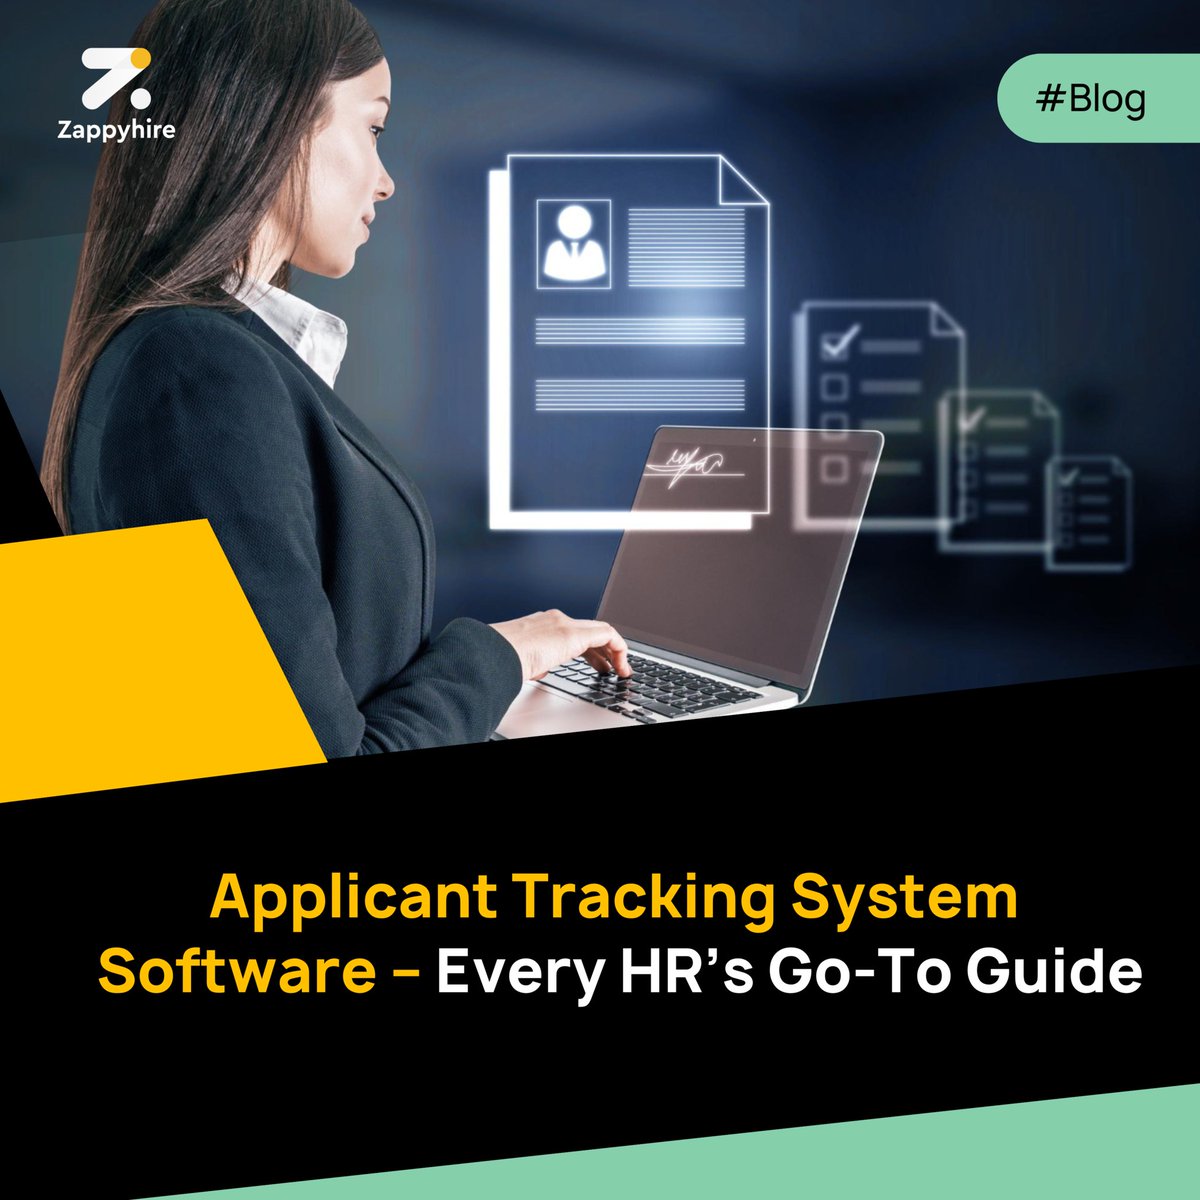 97.4% of Fortune 500 companies have excelled in their recruitment efforts. How?
Our latest blog,  Applicant Tracking System Software - Every HR’s Go-To Guide, will help you do just that!🚀
Give it a read bit.ly/4dC7fbr
#ats #applicanttrackingsystem #recruitmentautomation